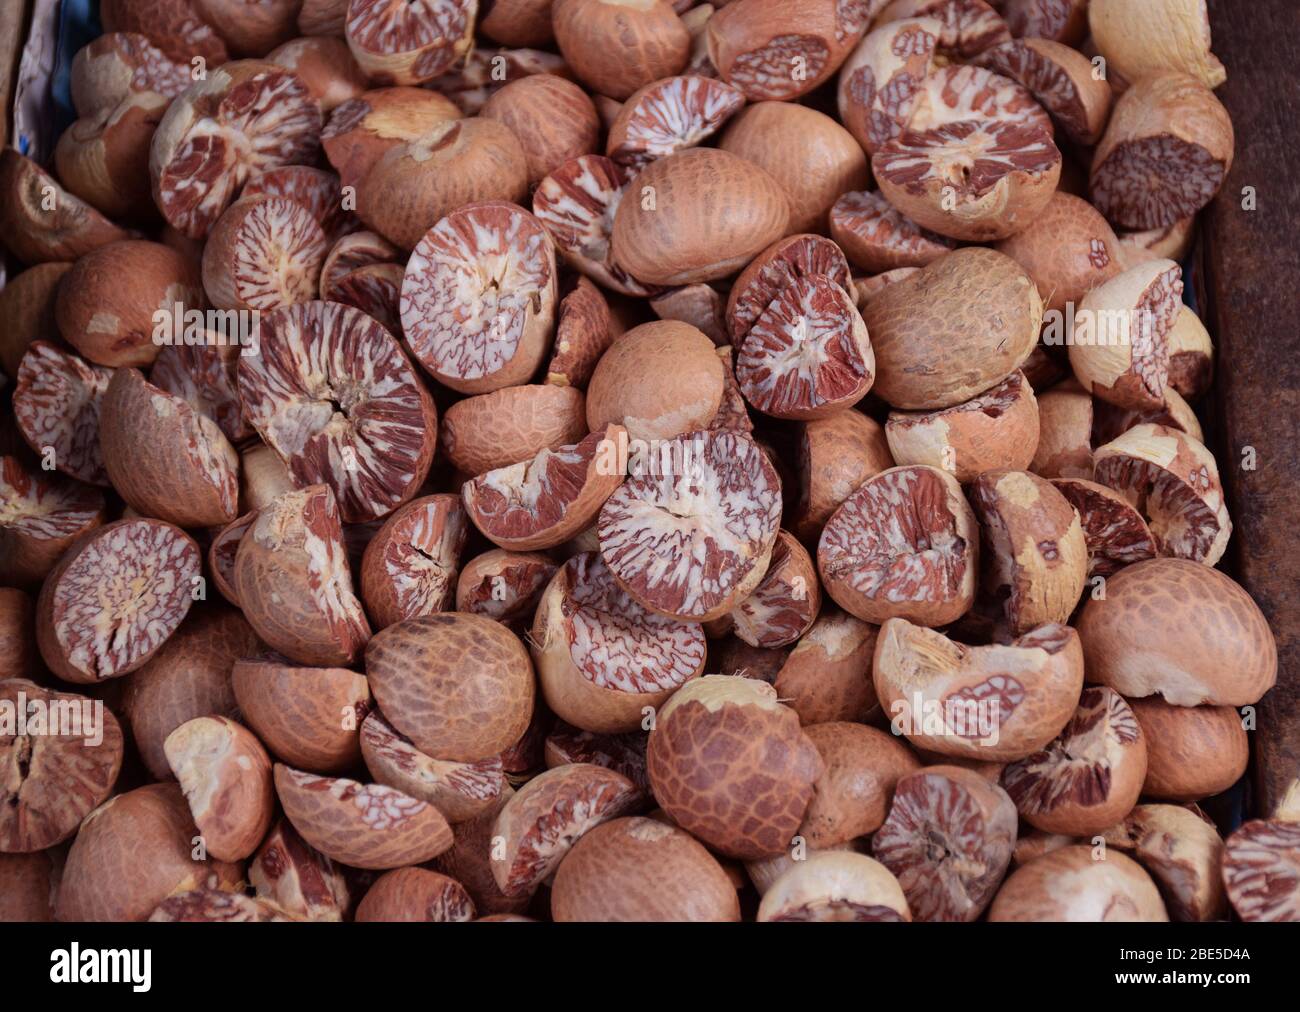 Betel nuts cut and uncut also called as Supari in India Stock Photo